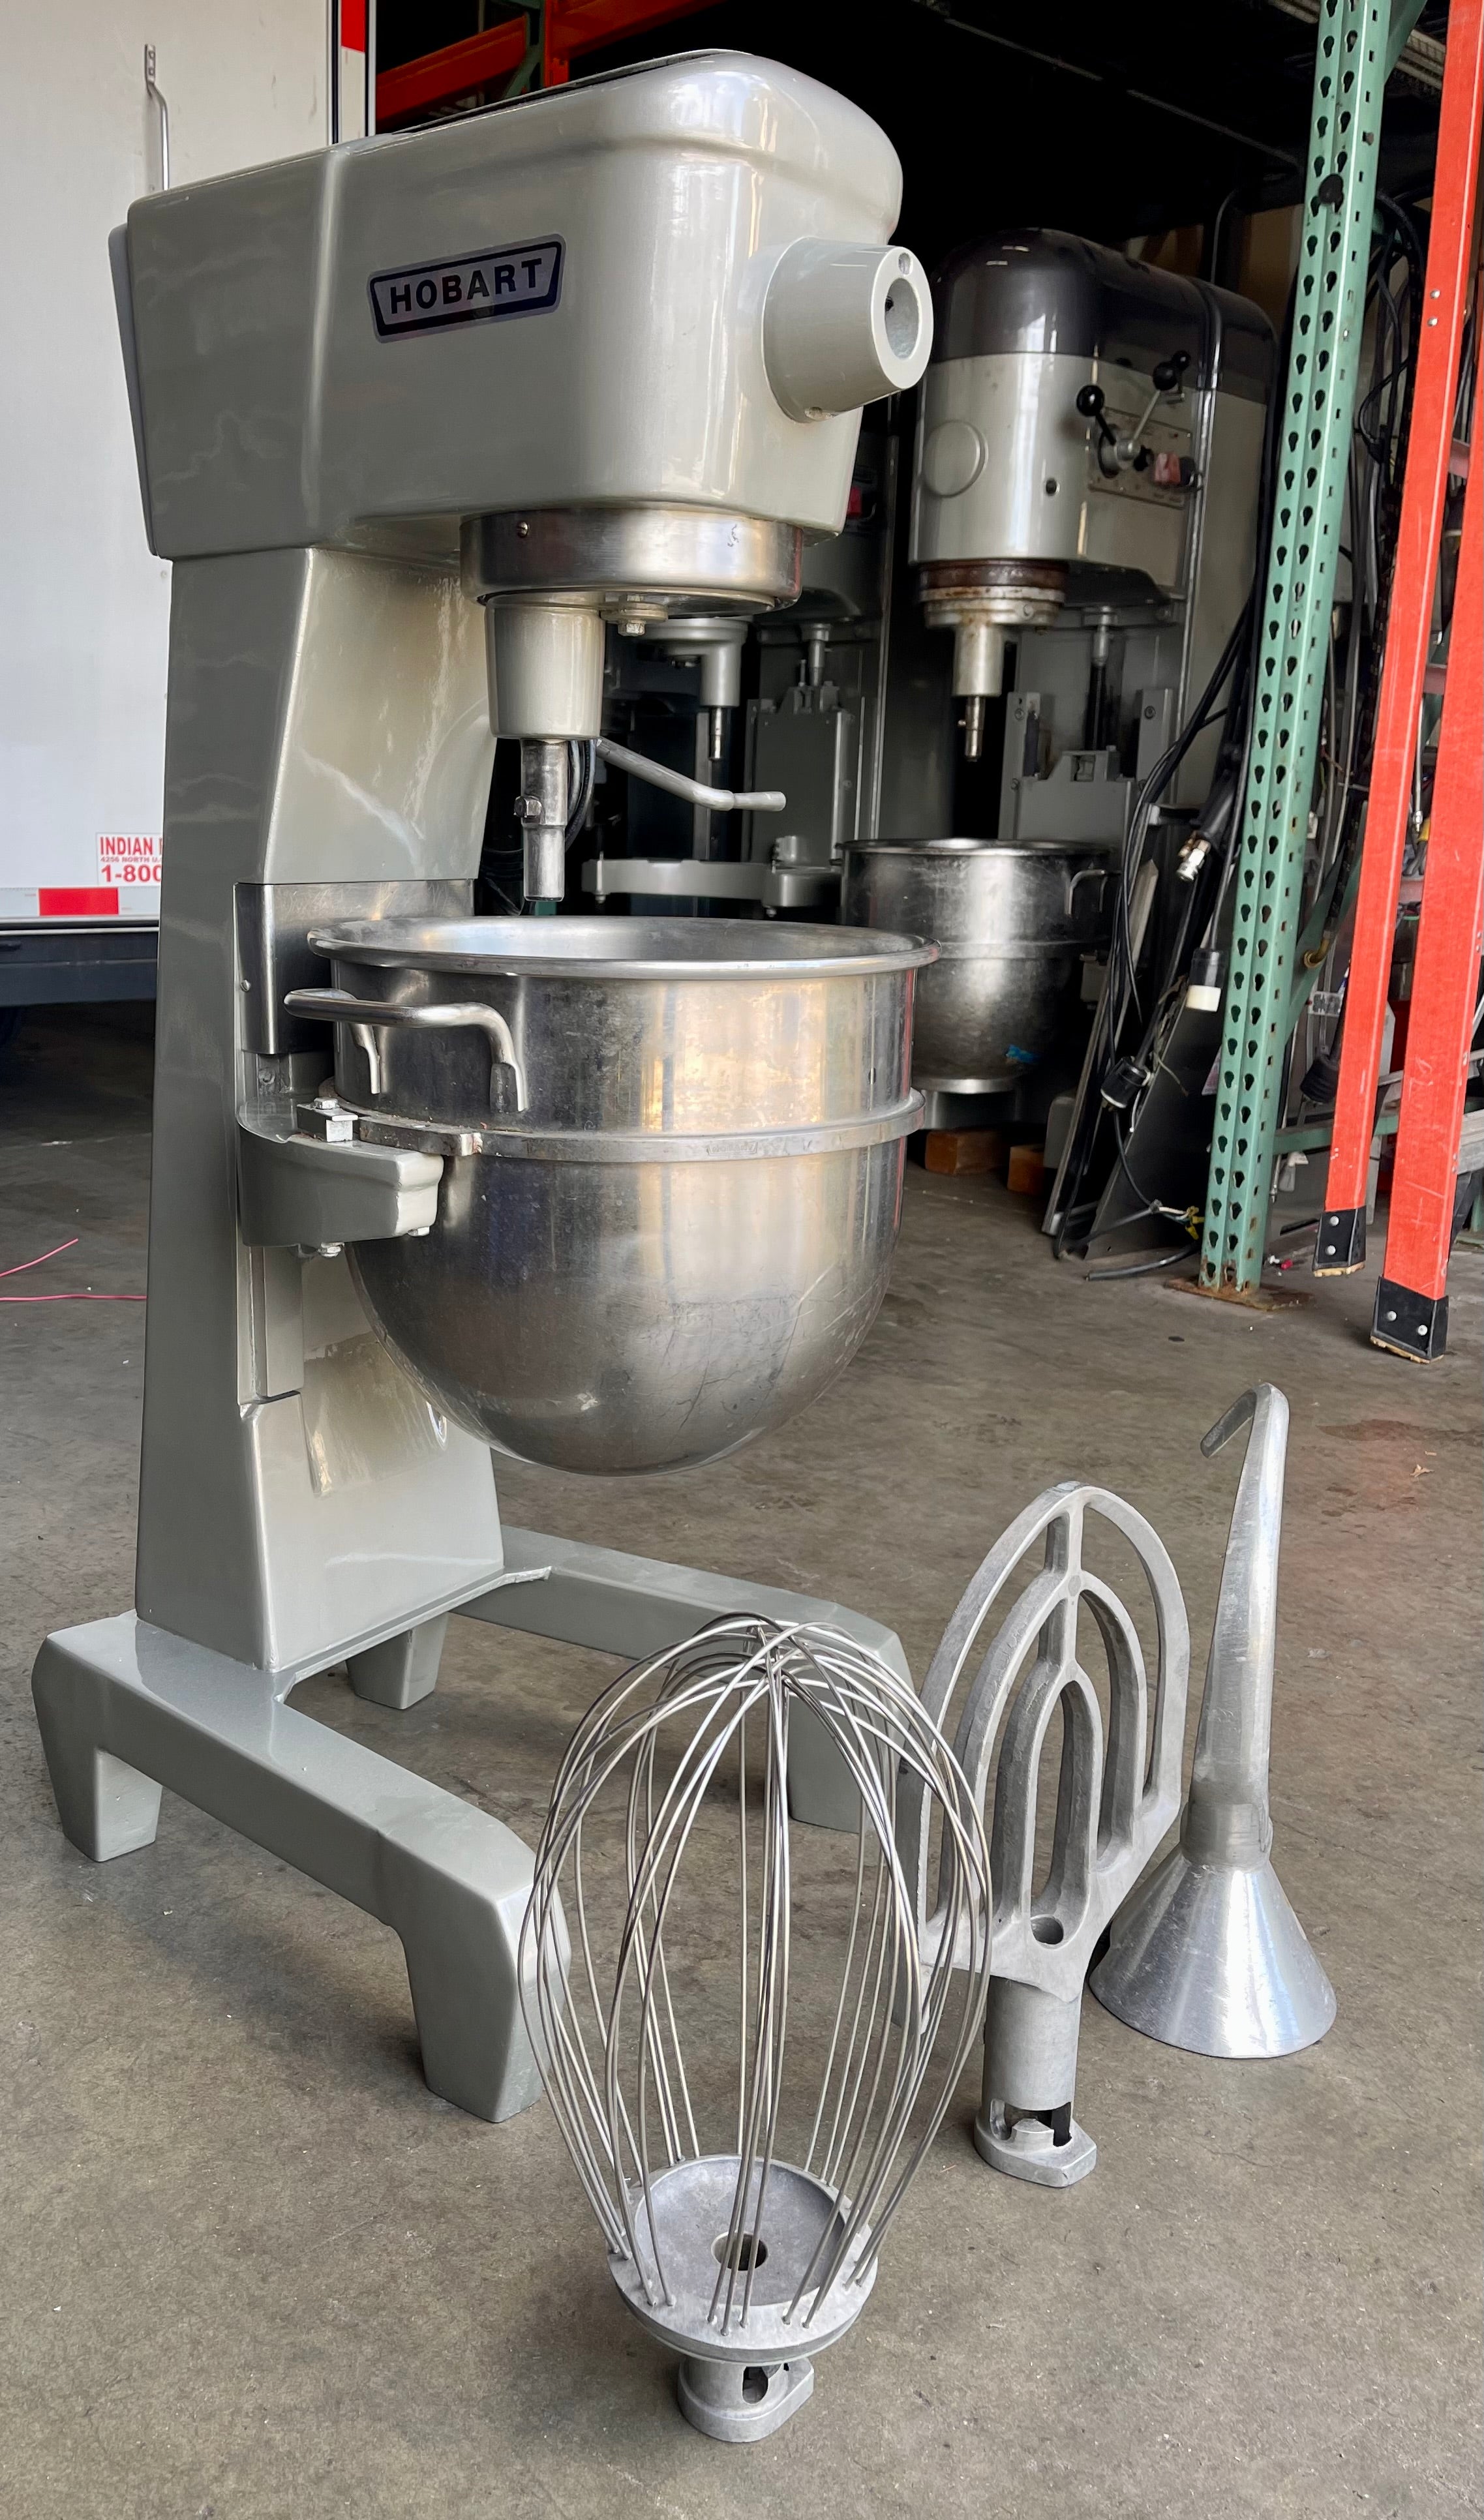 Hobart D300t 30 quart mixer 115V comes with a stainless steel bowl and three attachments